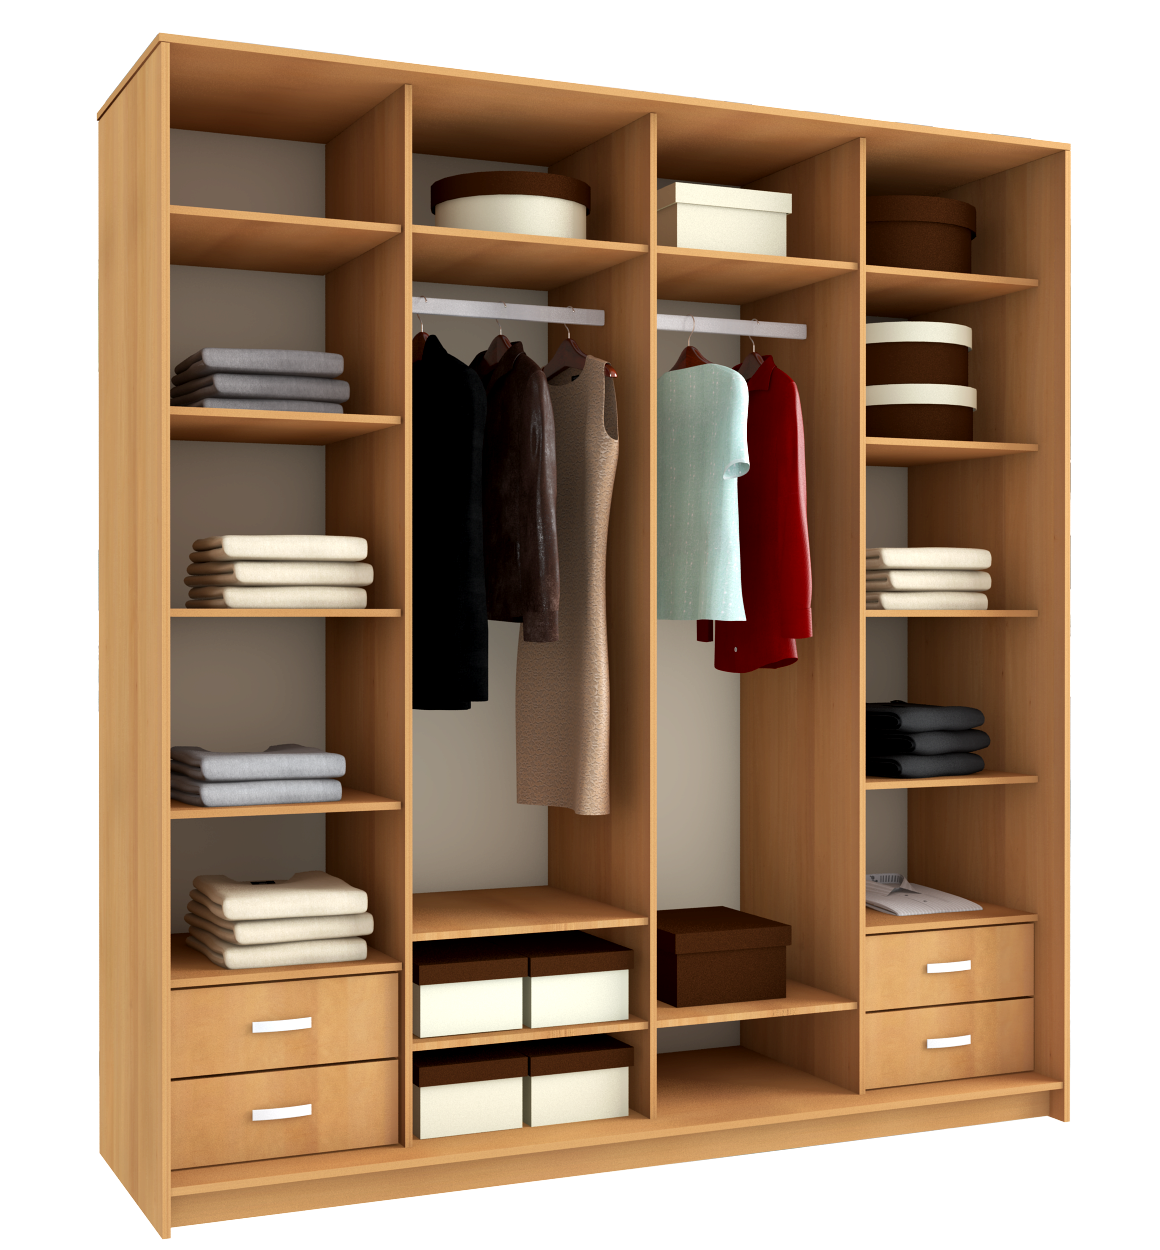 Cupboard, closet PNG images free download.